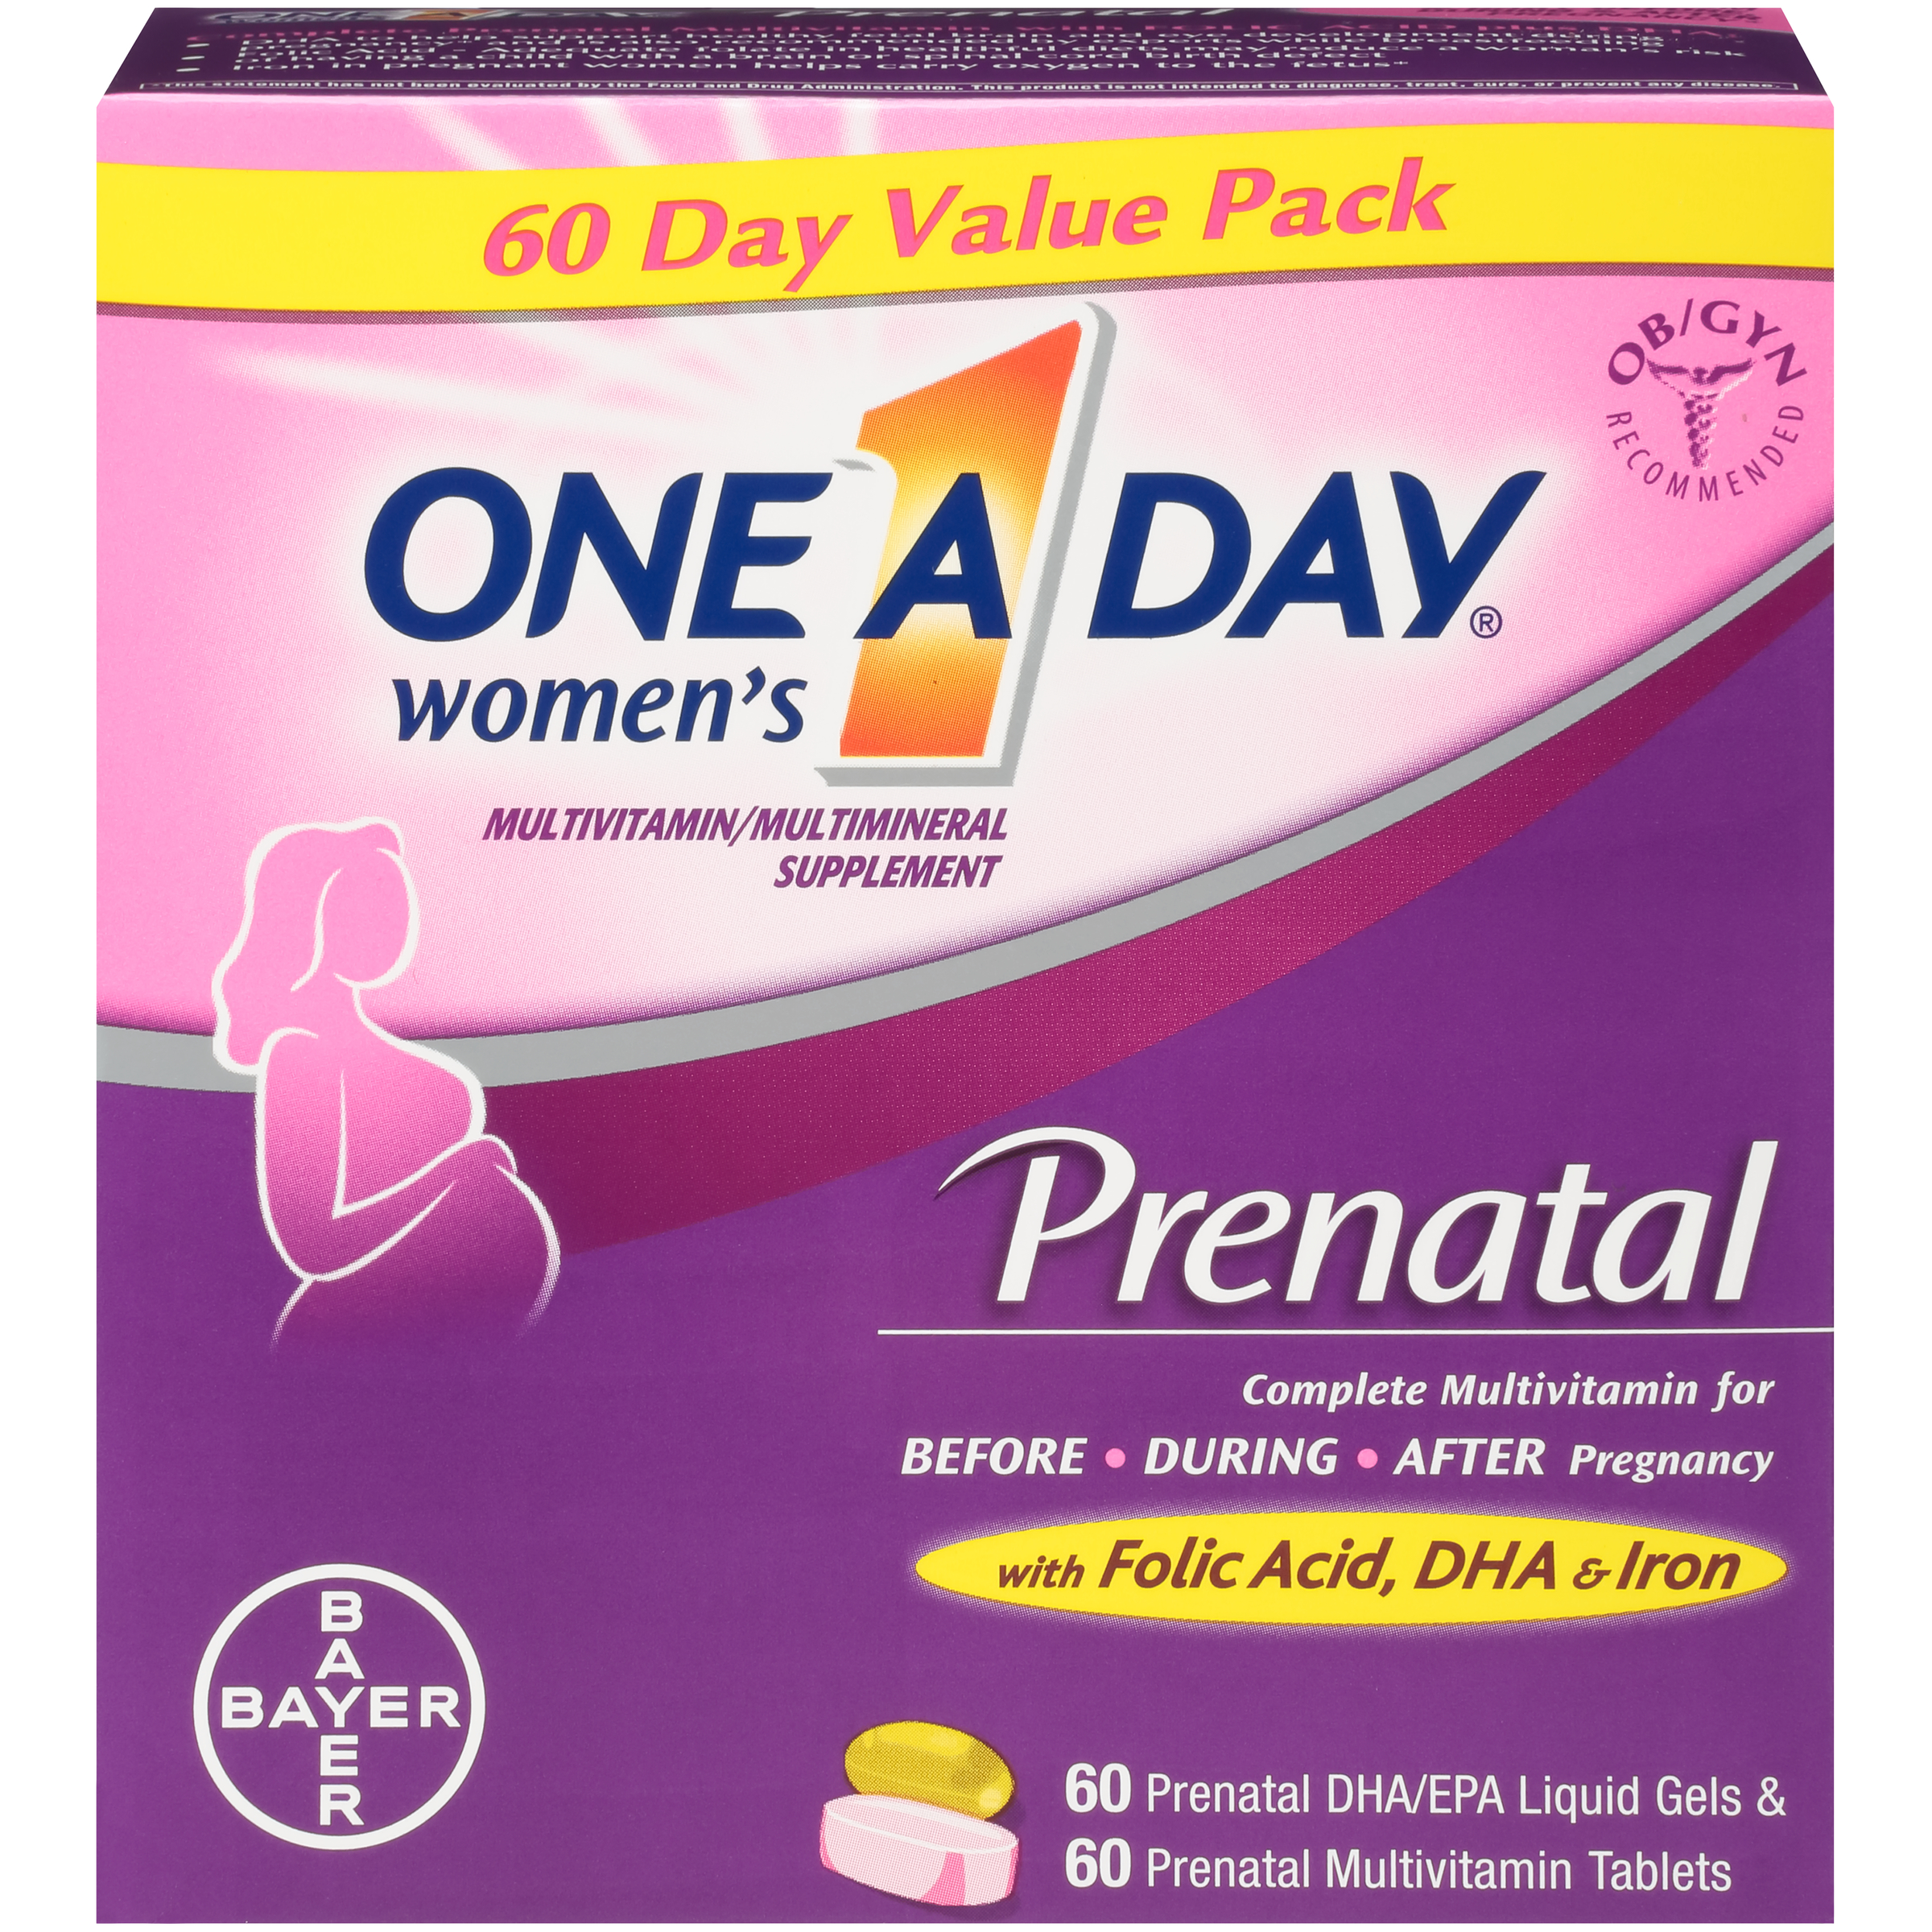 One A Day Women's Prenatal Multivitamin Two Pill Formula, Supplement for Before, During, and Post Pregnancy, Including Vitamins A, C, D, E, B6, B12, Folic Acid, and Omega-3 DHA, 60+60 Count - image 1 of 16